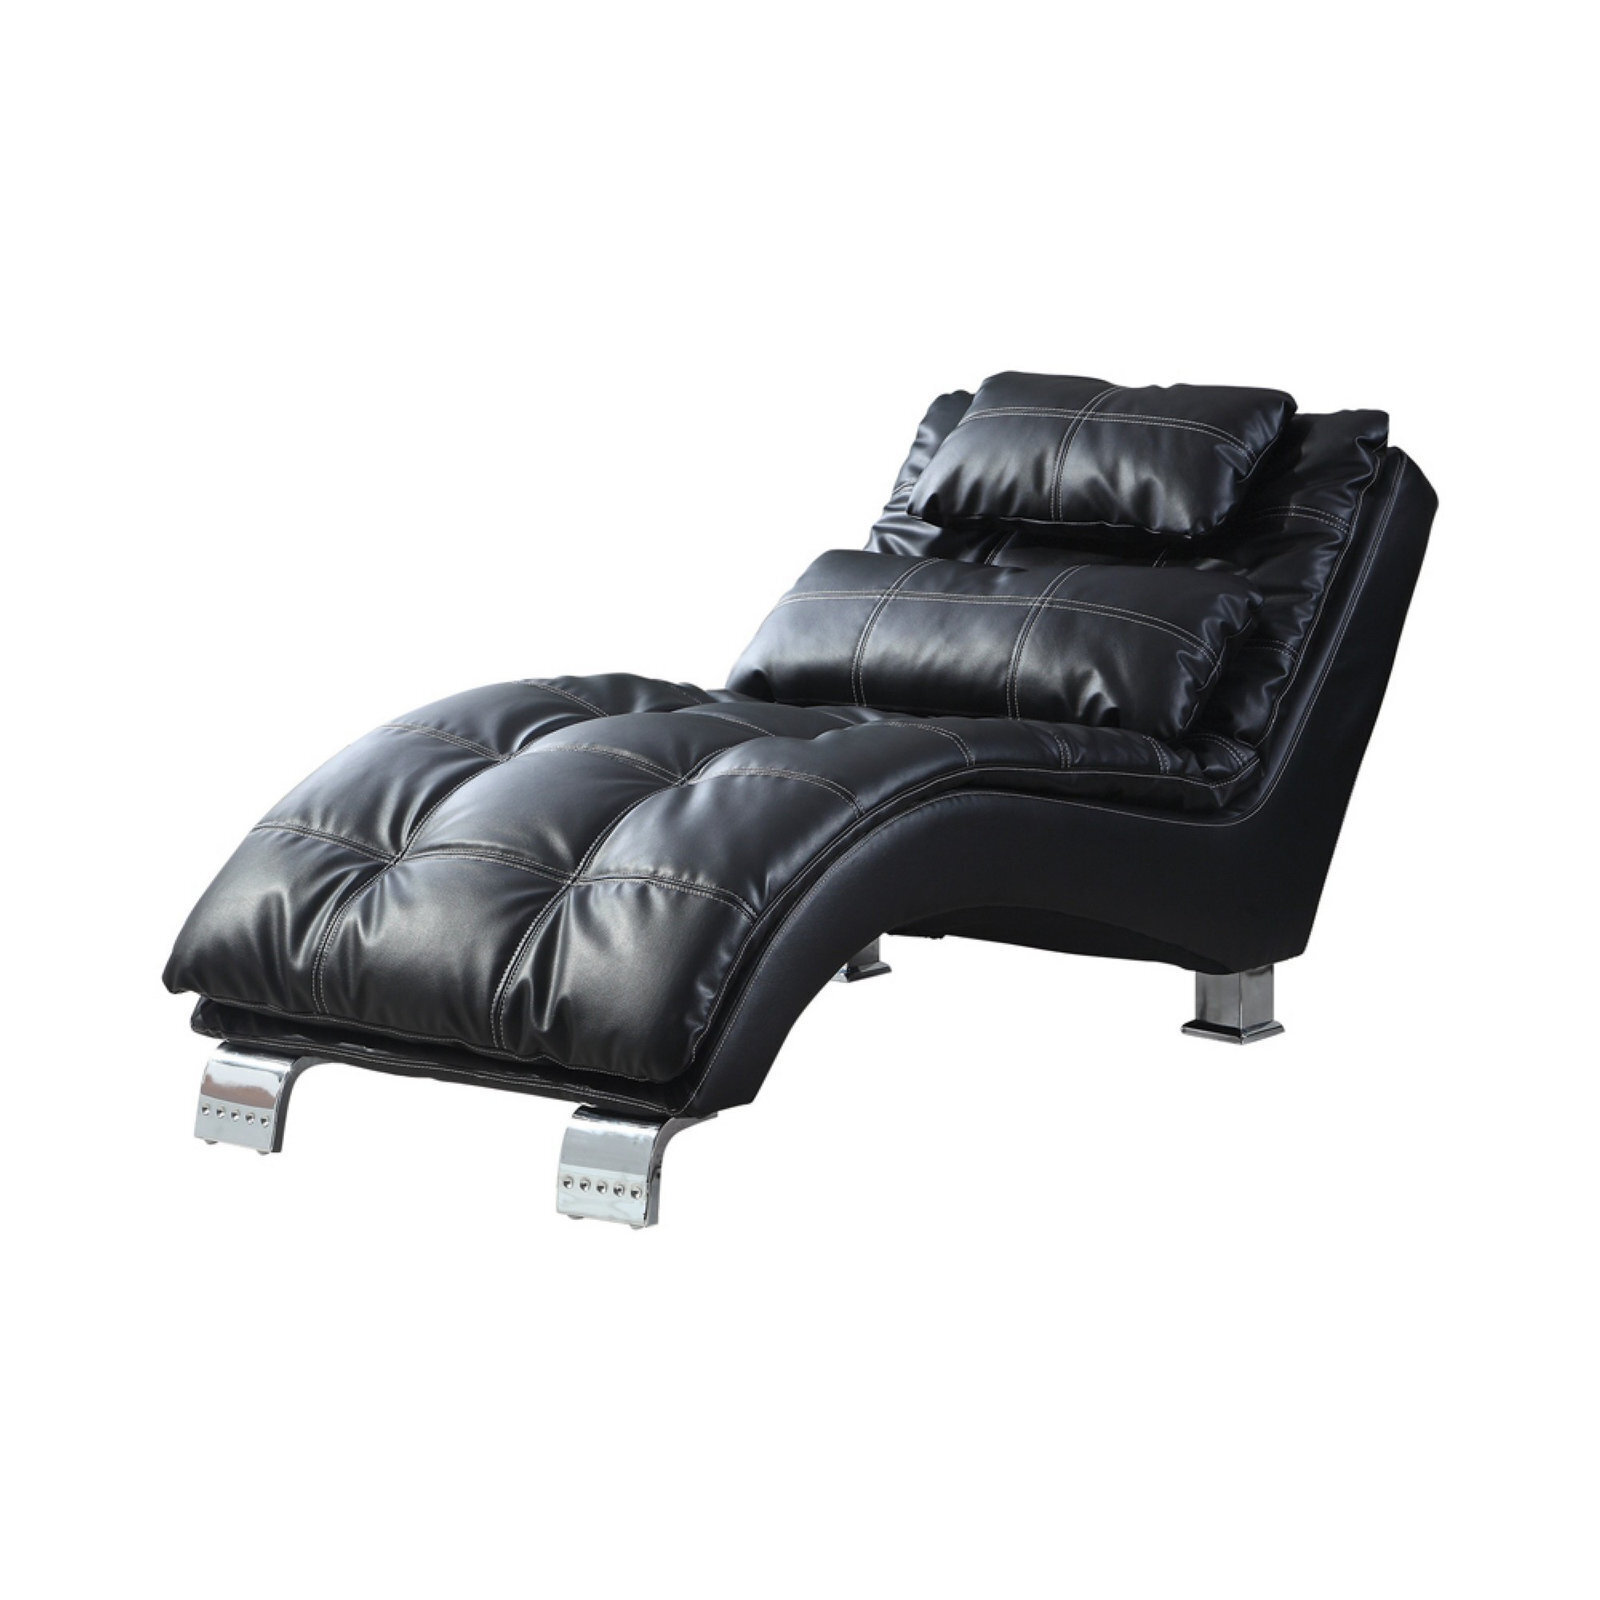 Faux leather black chaise lounge 